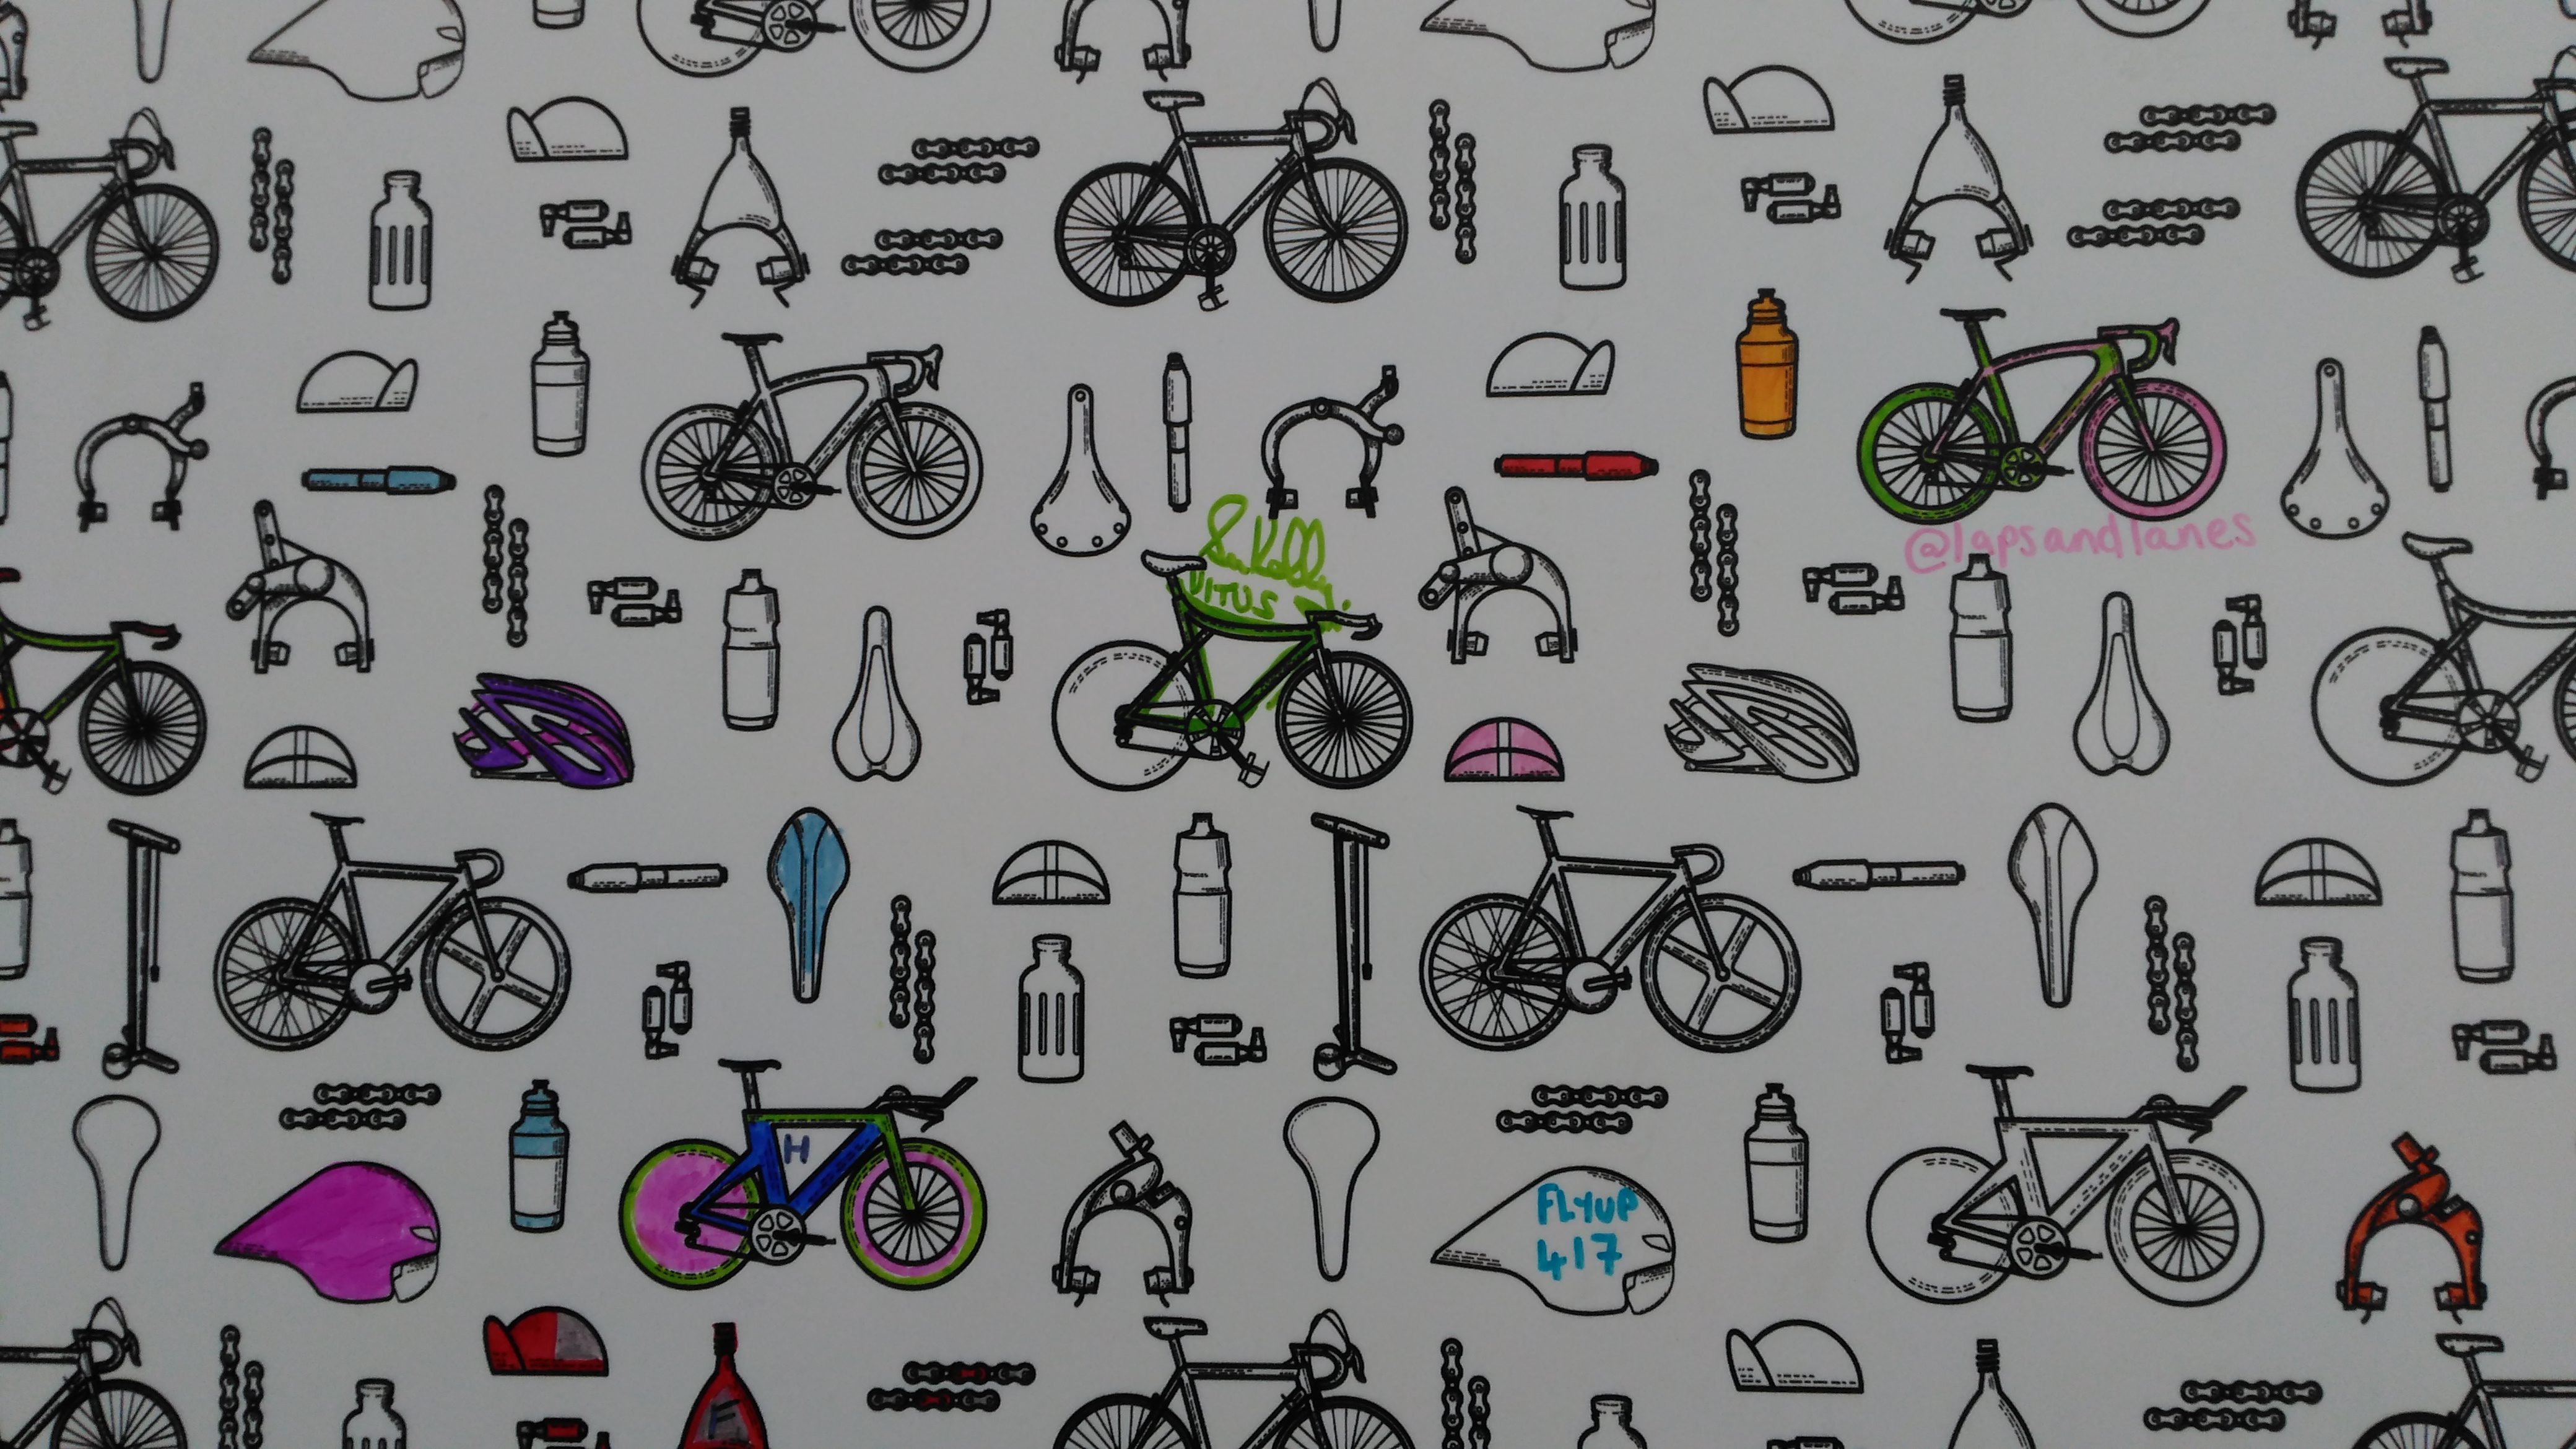 Wallpaper signed by Sean Kelly